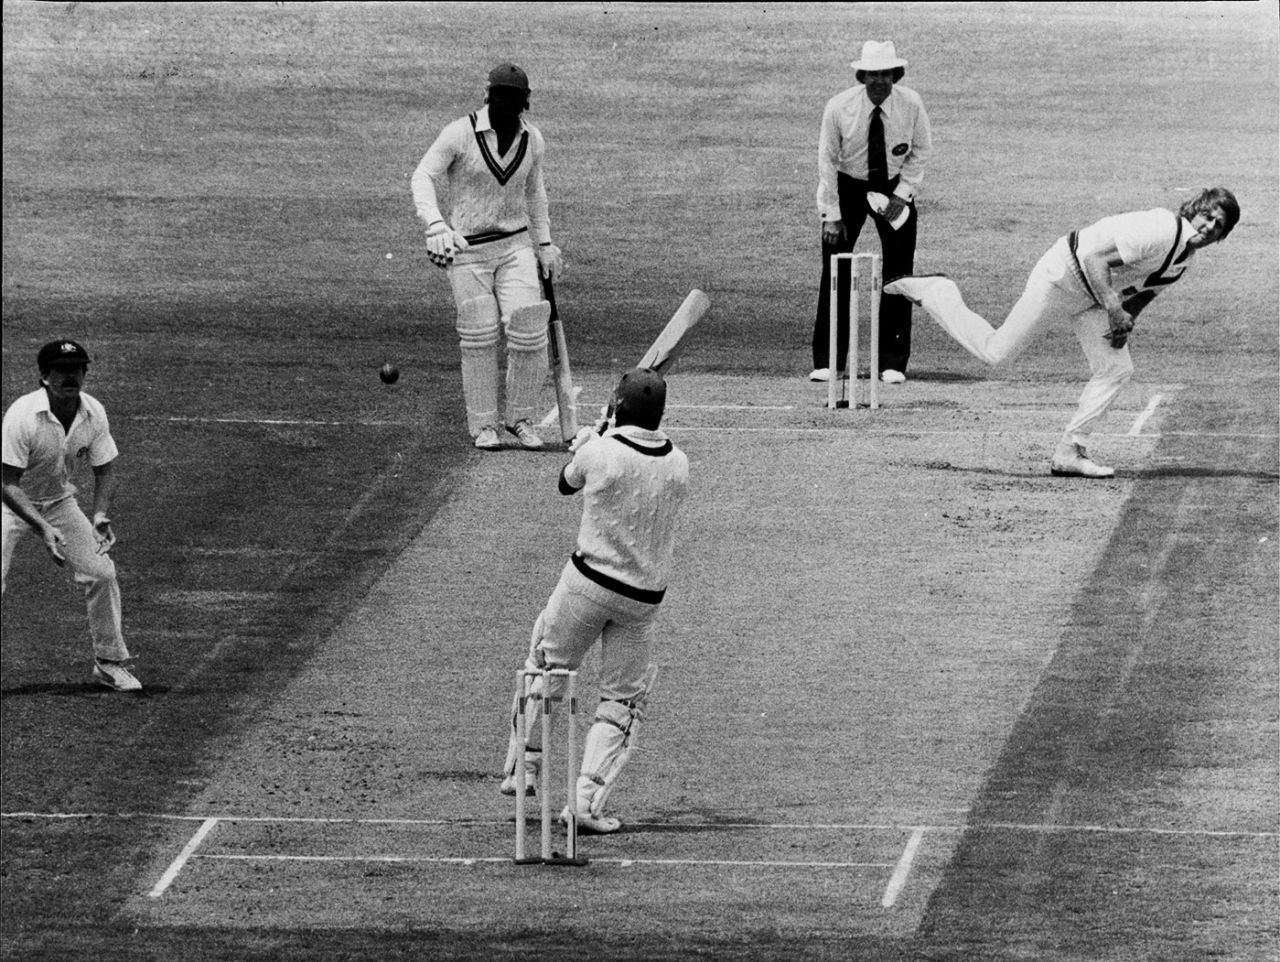 Desmond Haynes, trapped lbw to Jeff Thomson, for 15, Australia v West Indies, second Test, 1st day, Sydney, January 2, 1982